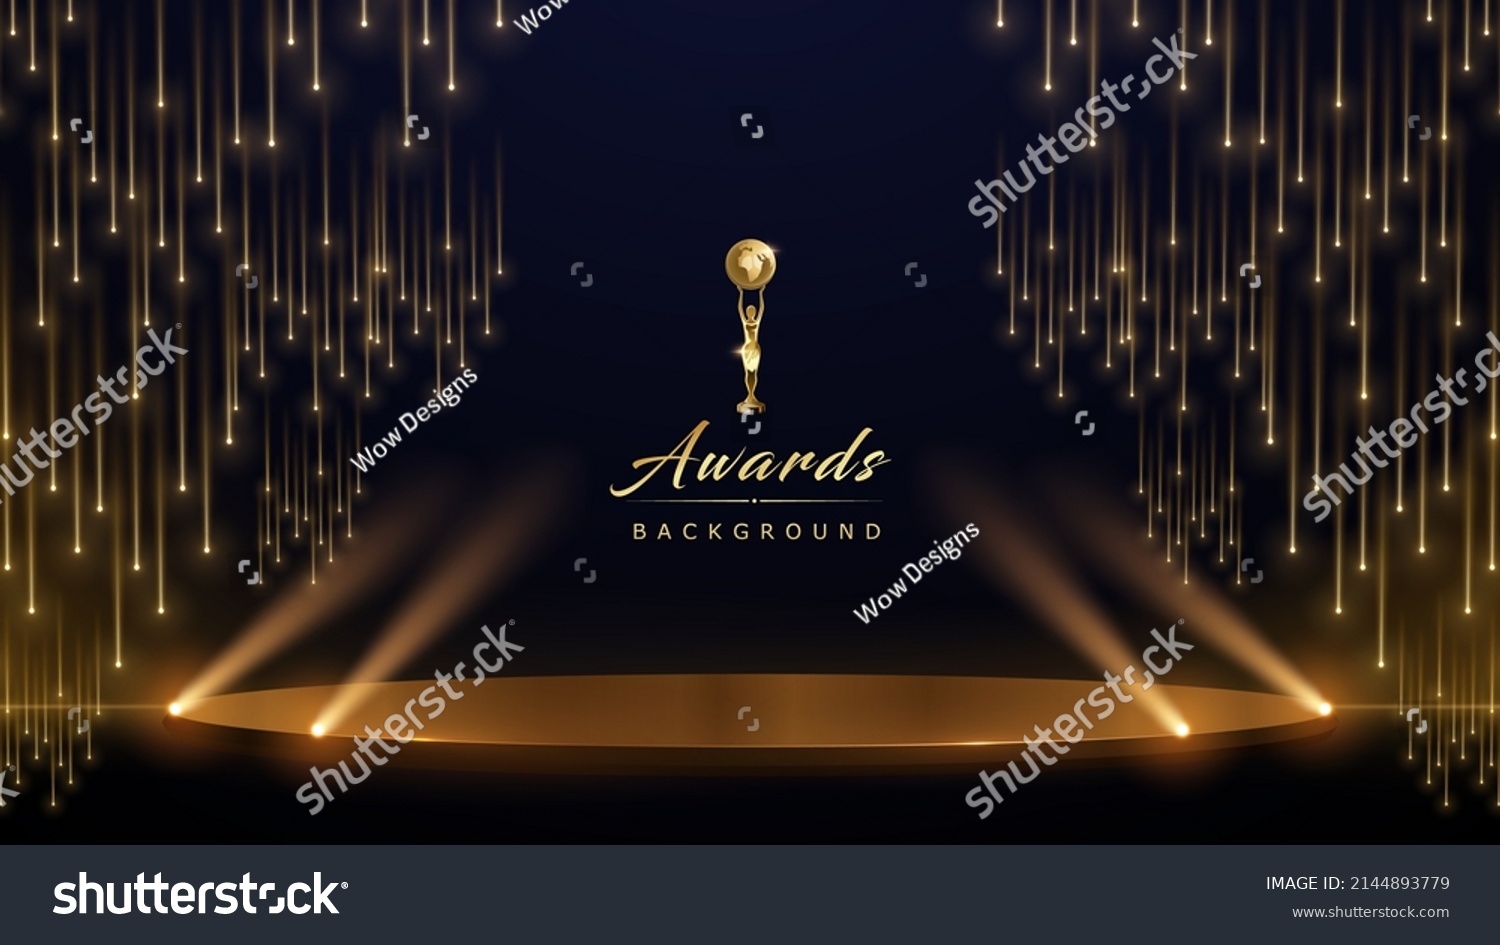 Golden Stage Spotlights Royal Awards Graphics Background. Lights Elegant Shine Modern Template. Space Falling Star Particles Corporate Template. Classy speedy lines Abstract trophy Certificate Banner. #2144893779